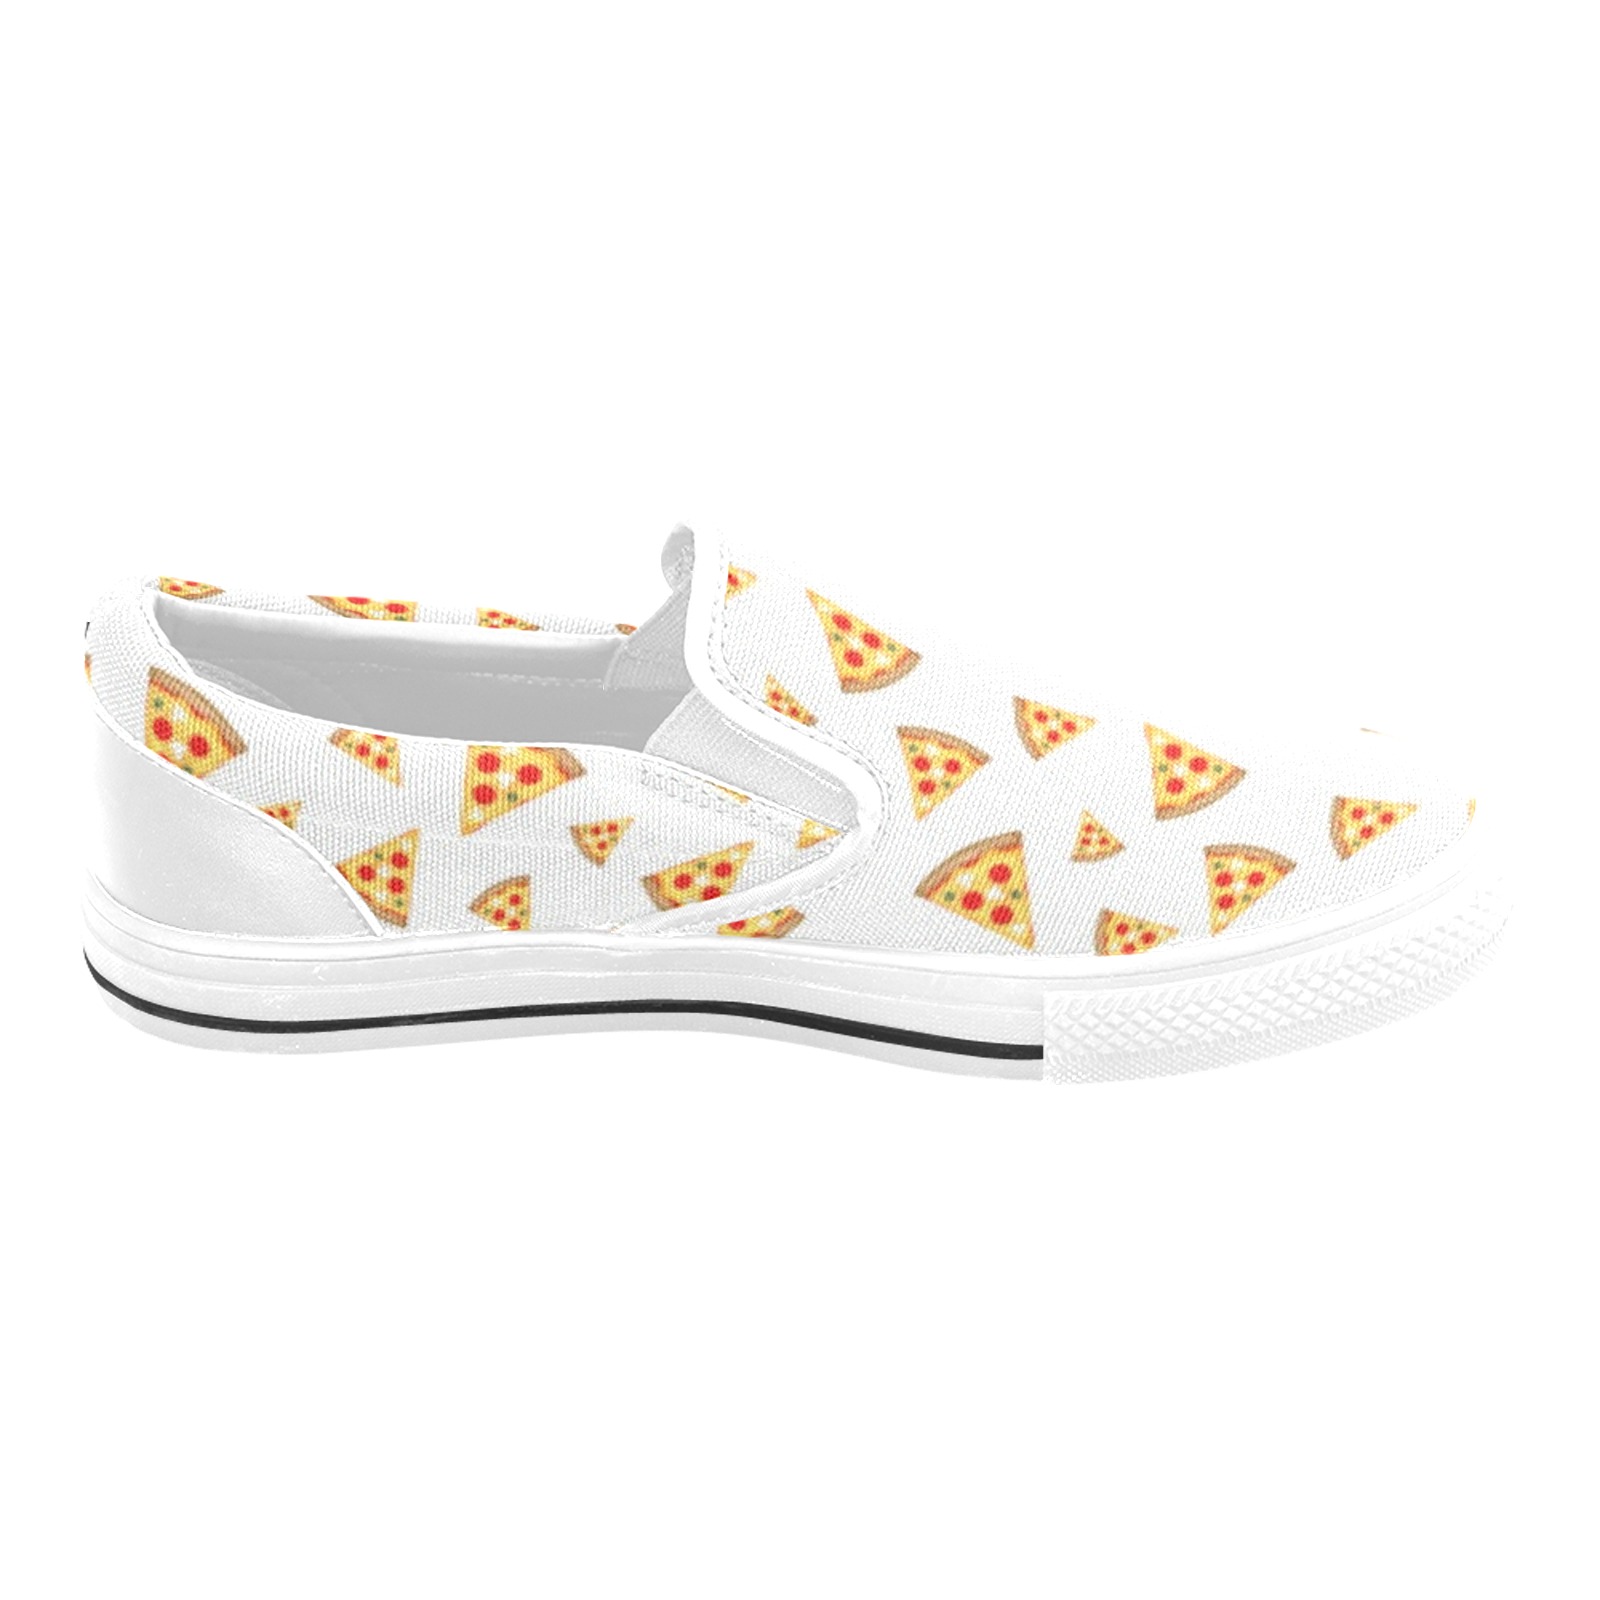 Cool and fun pizza slices pattern on white Men's Slip-on Canvas Shoes (Model 019)